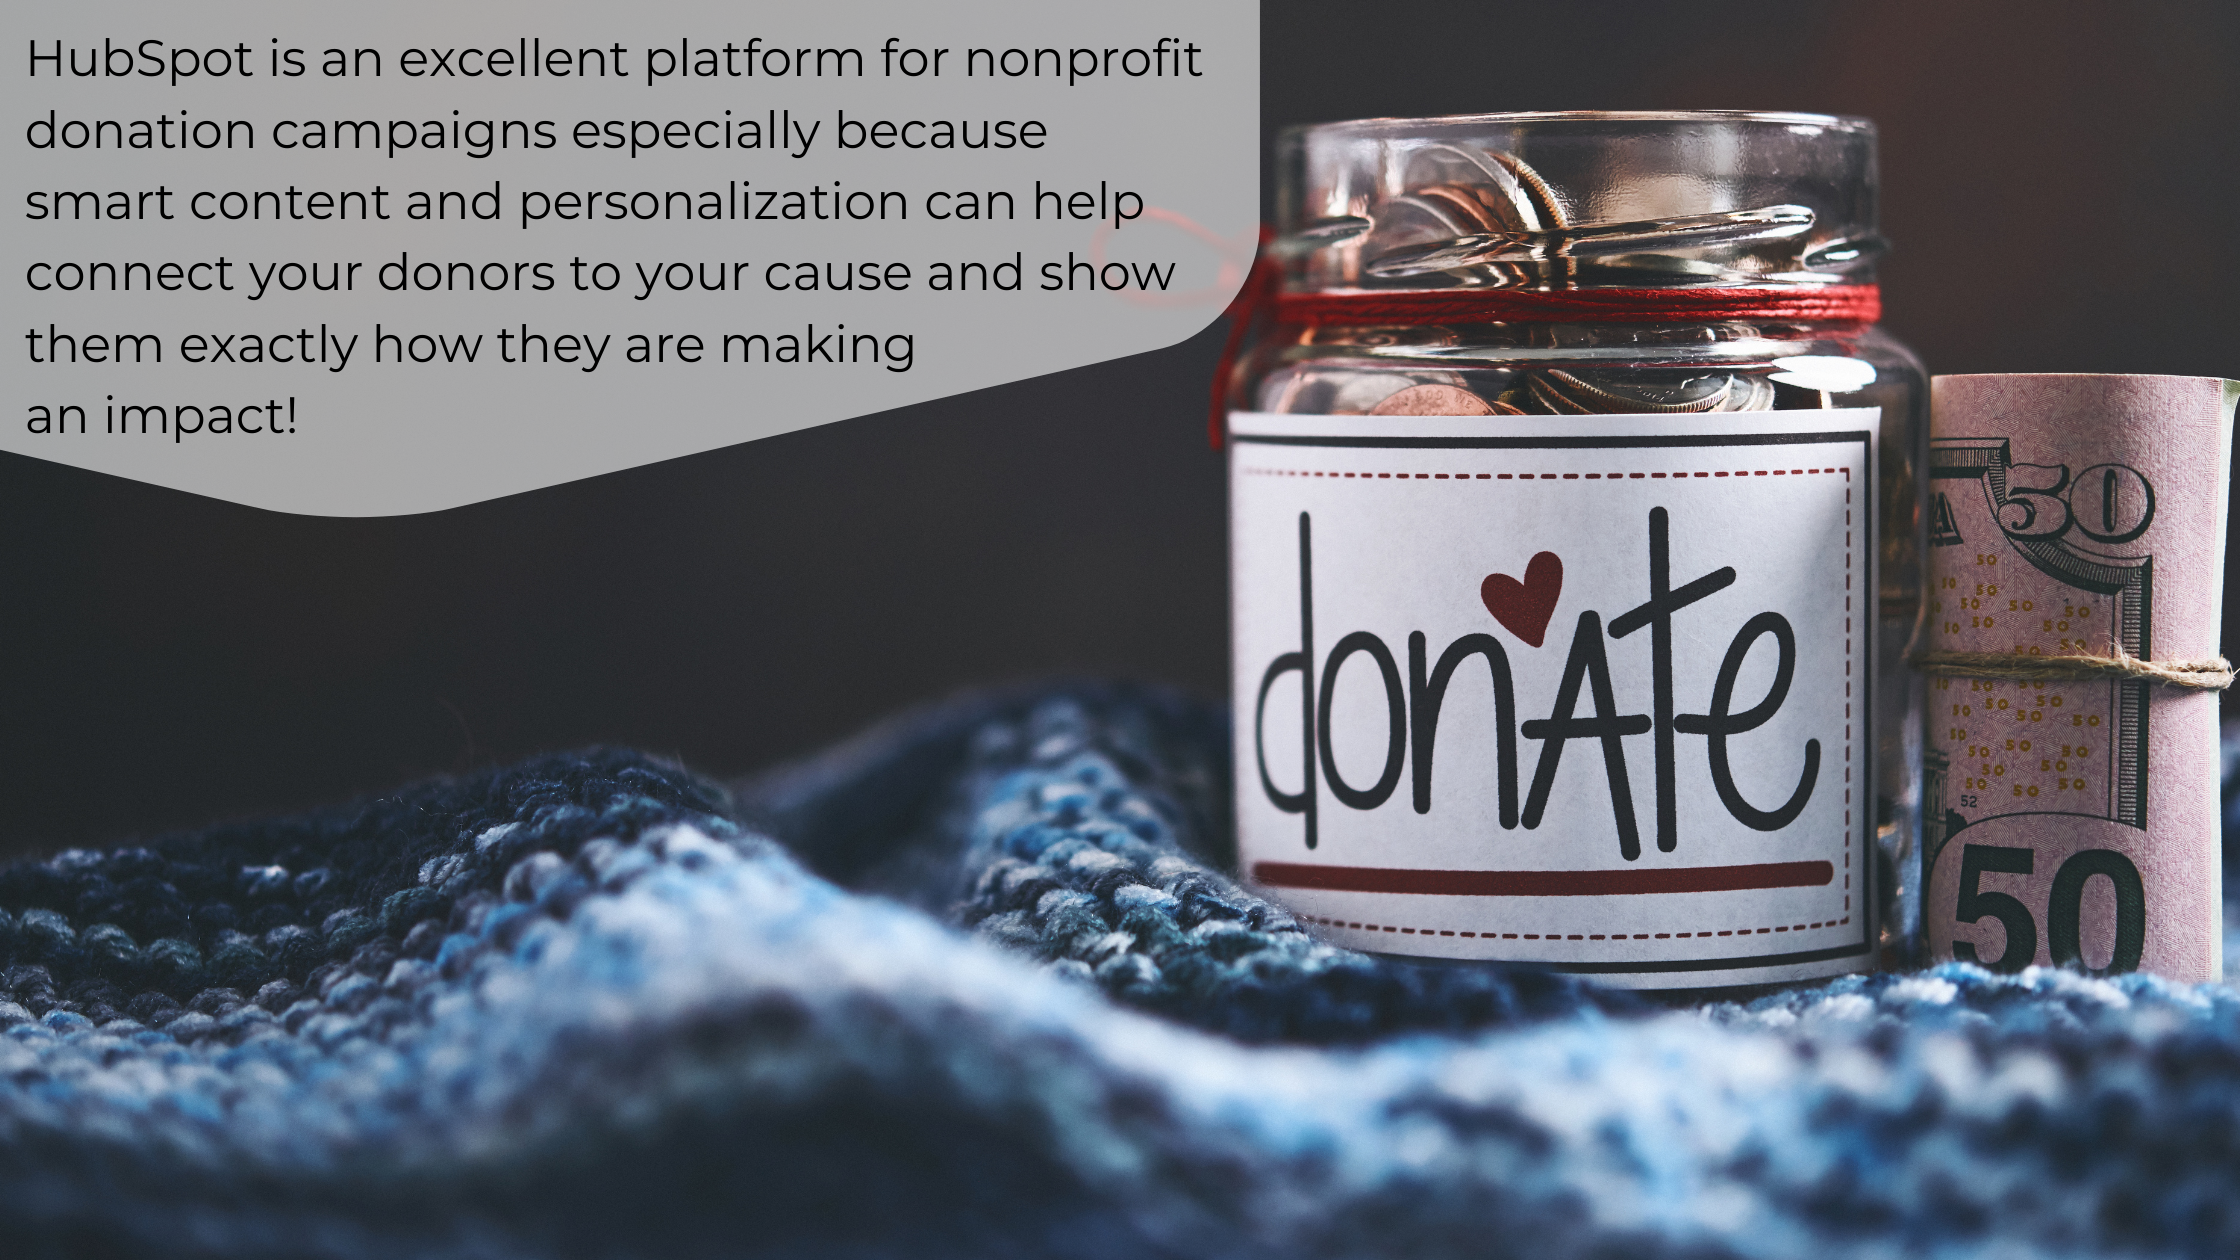 5 - body blog image - Top 3 Challenges Nonprofits Face Today & How HubSpot Fixes Them All